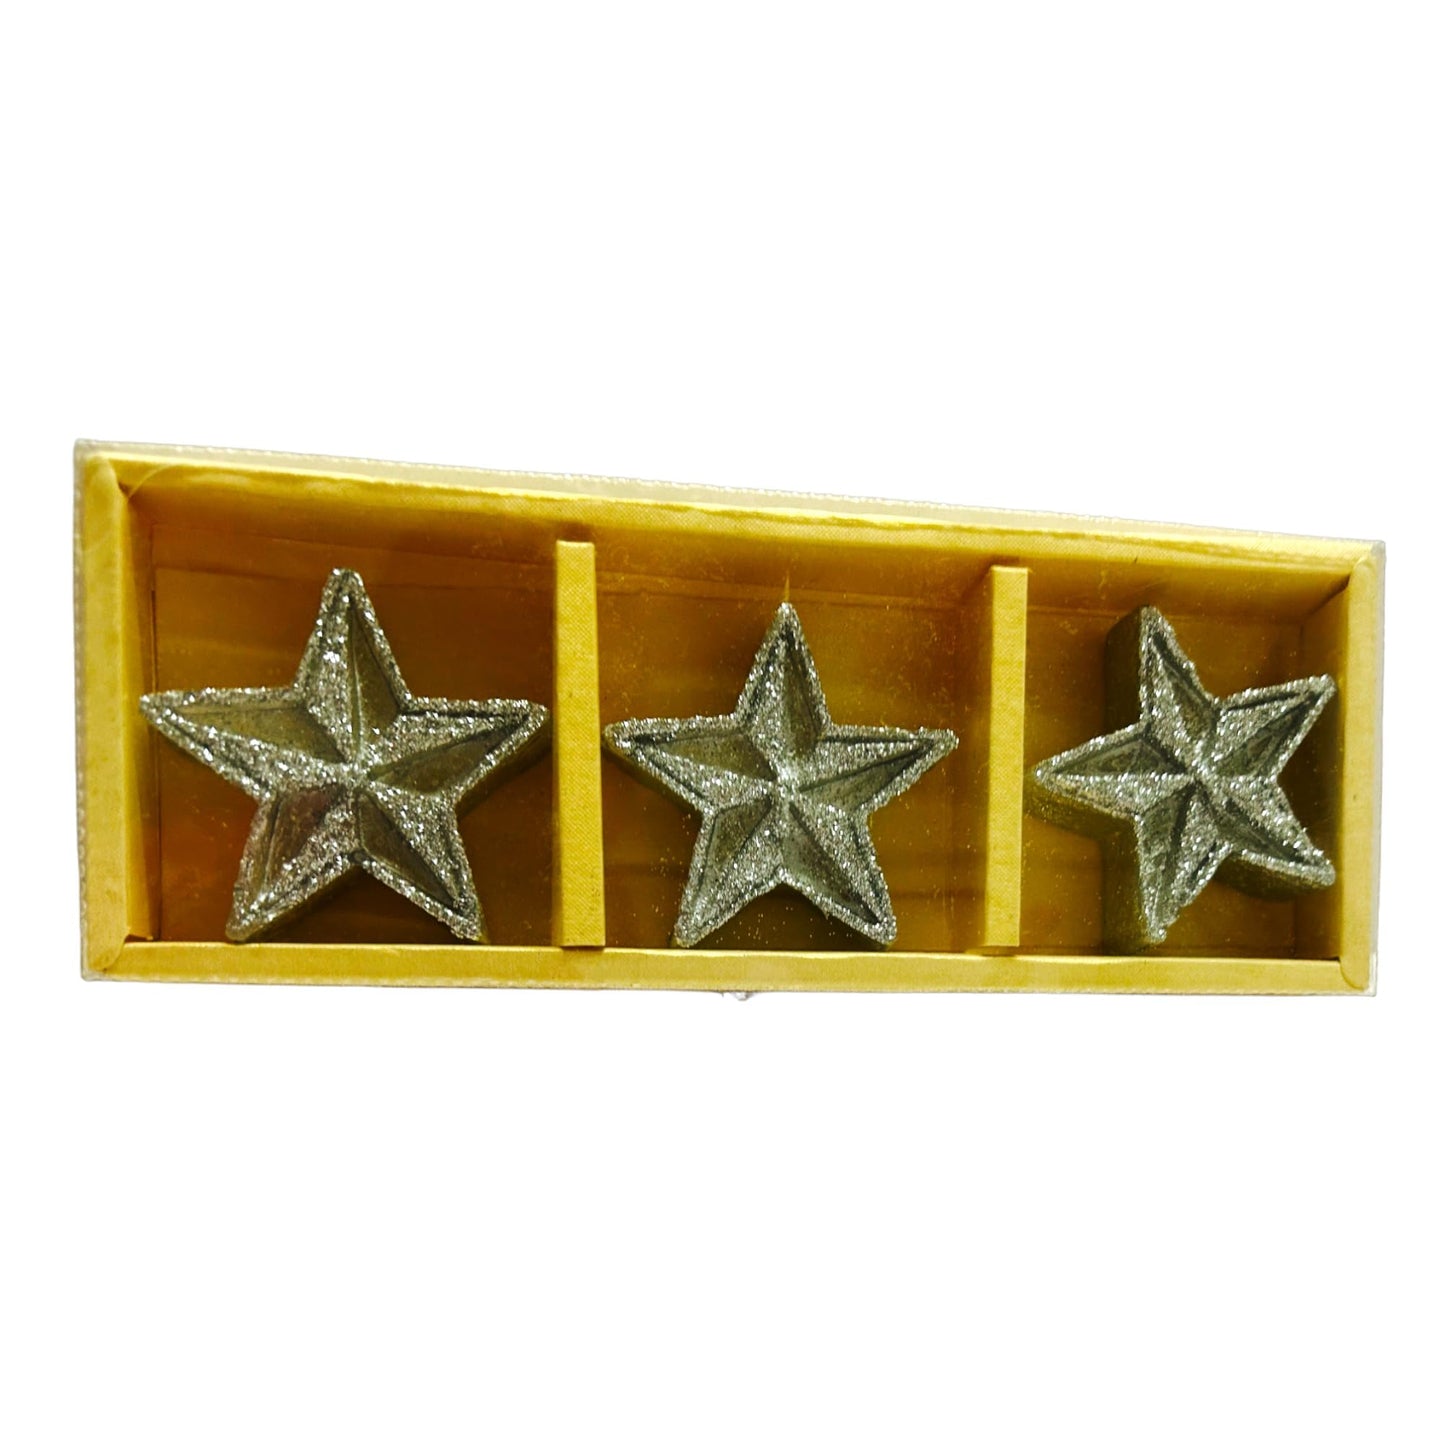 Pujahome Star Shape Candle for Decoration, Diwali Decoration for Home, Office Pack of 6 Candles(Silver Color)